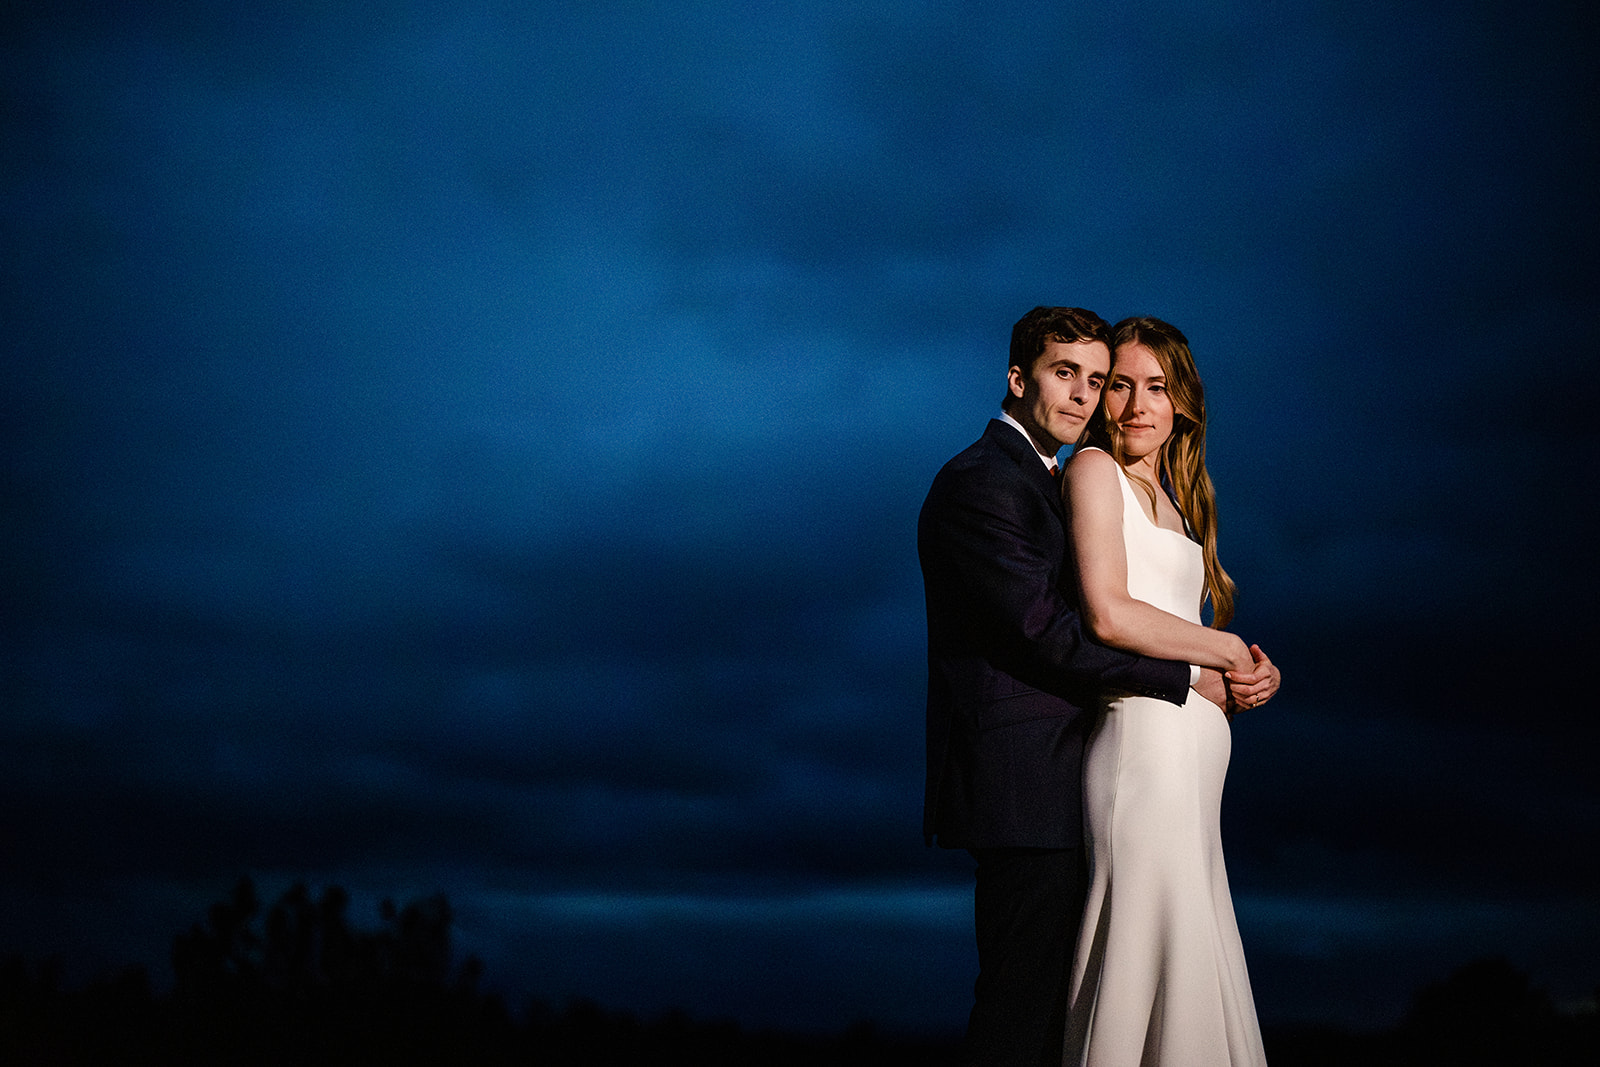 Night Portrait of Bride and Groom against a deep blue sky.